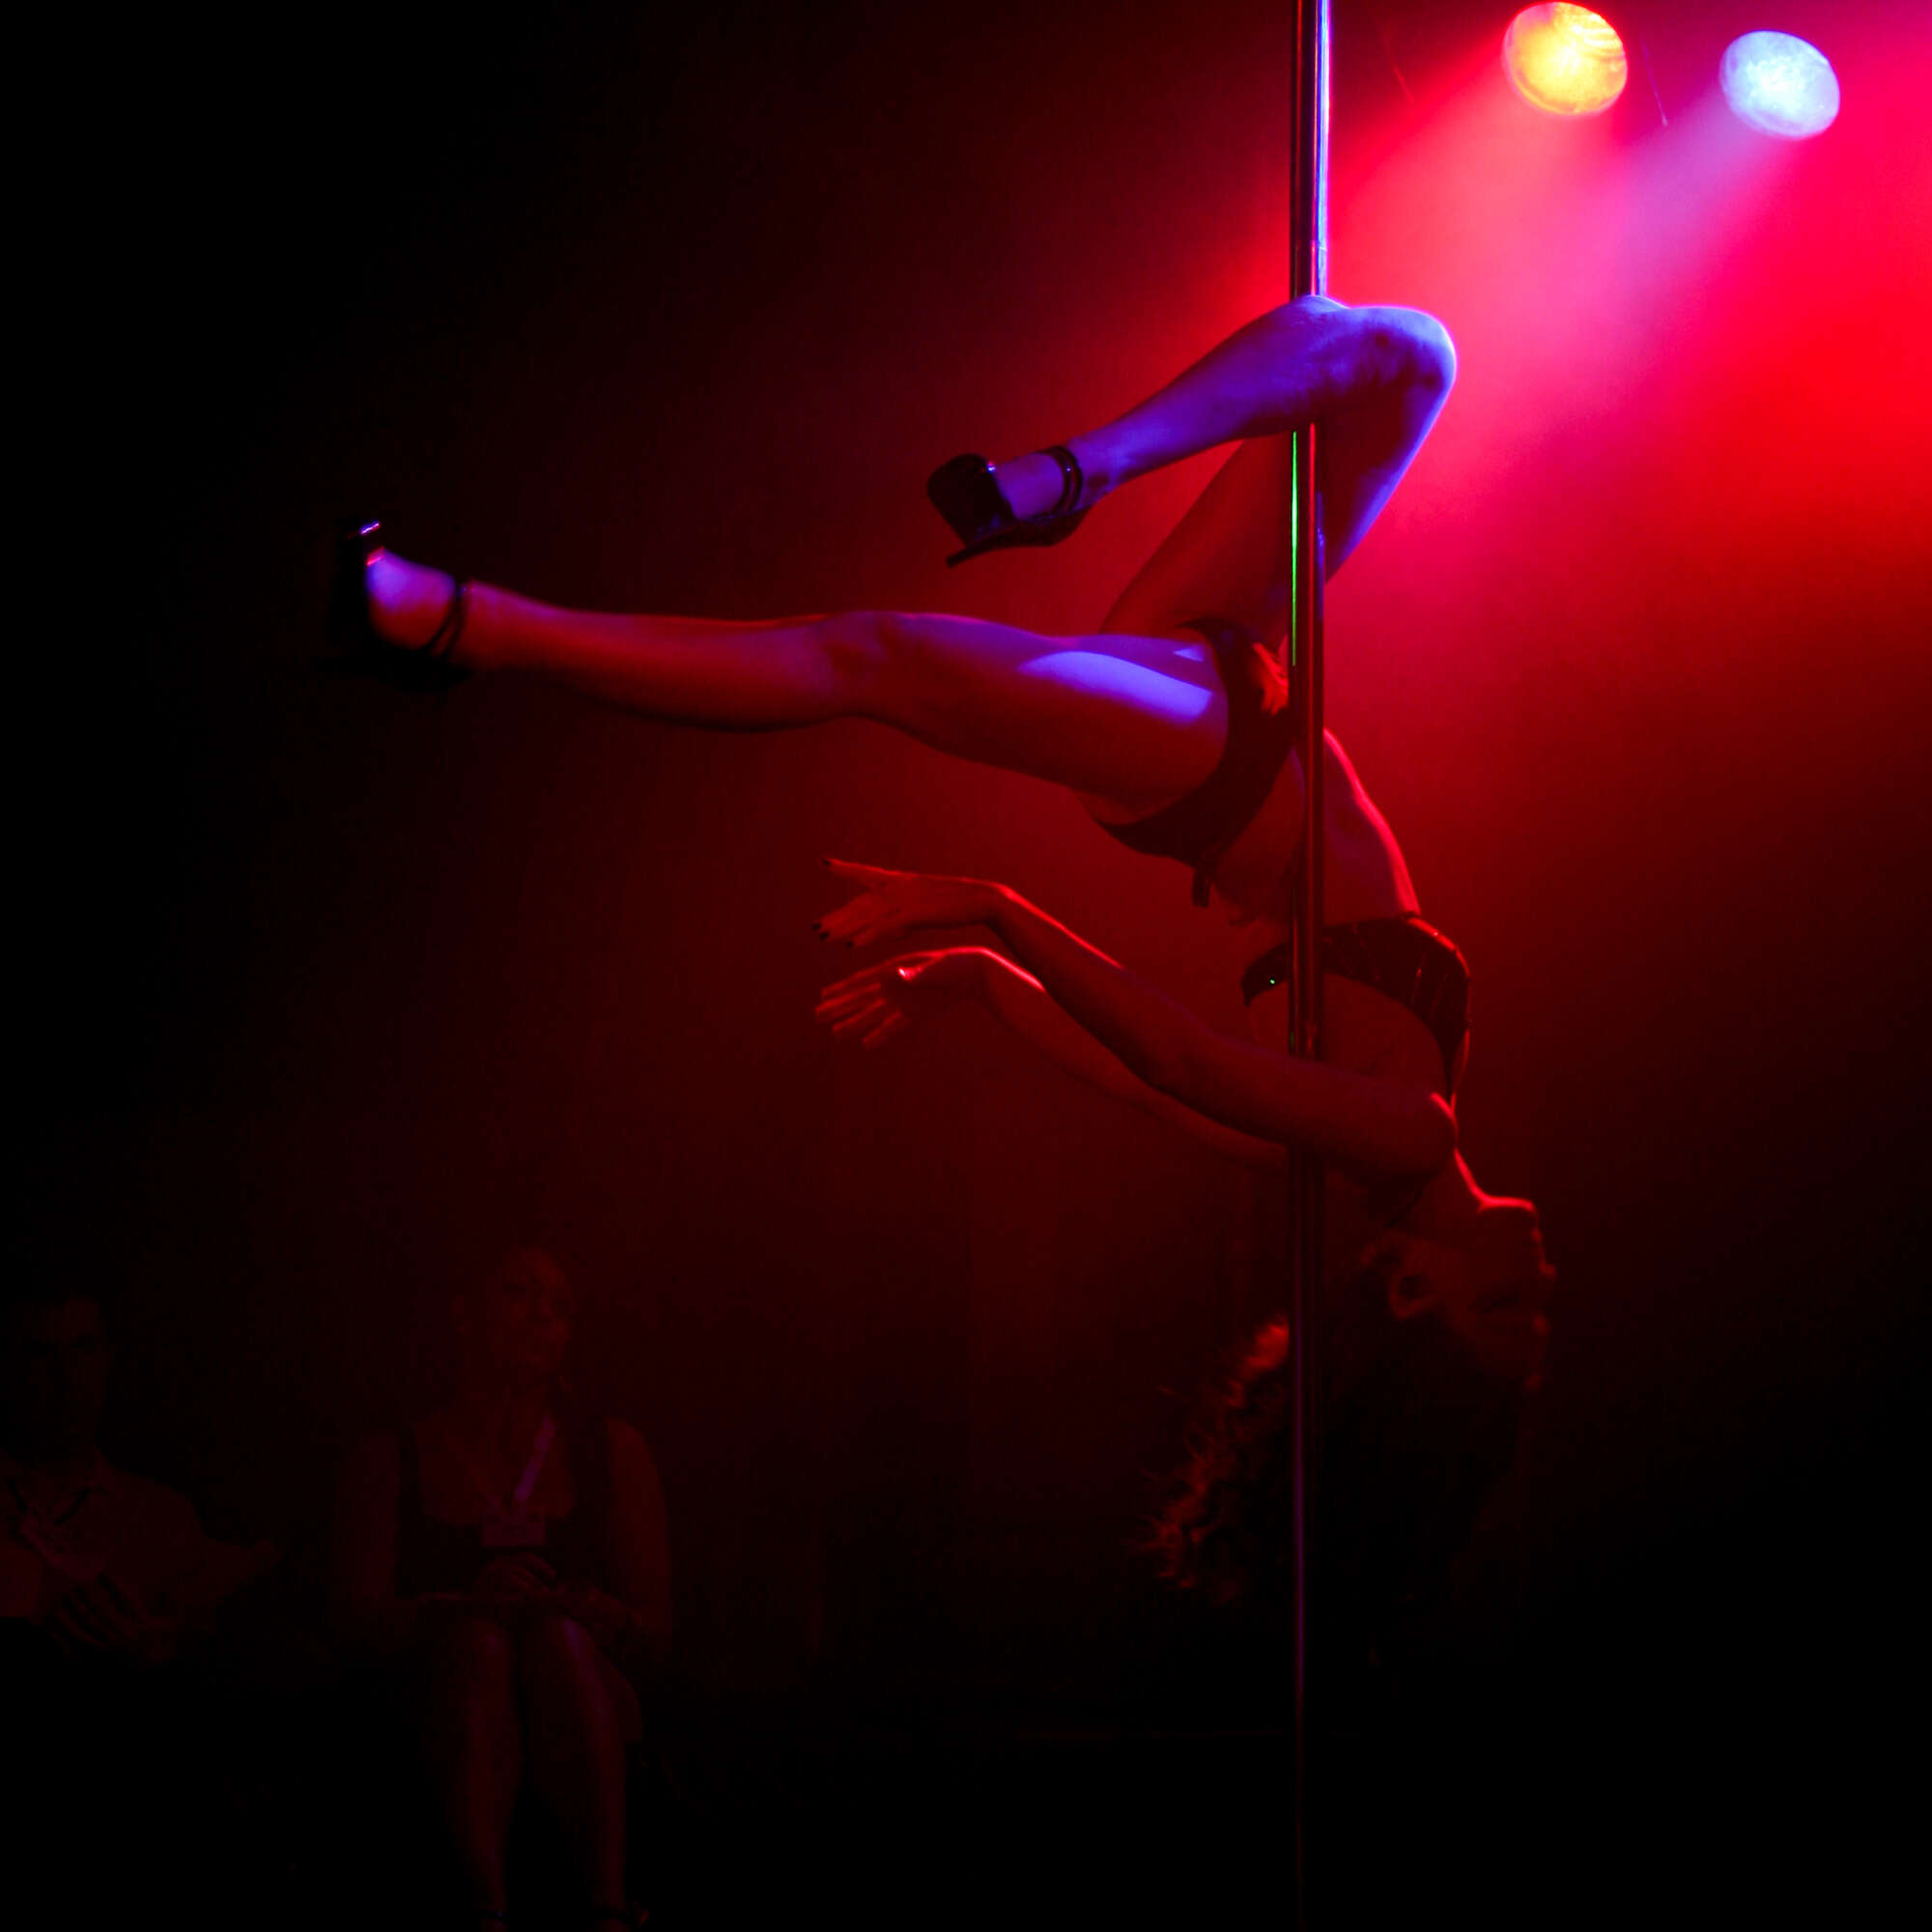 Montreal's Best Strip Clubs (With Photos) Stripper Pole Club. 